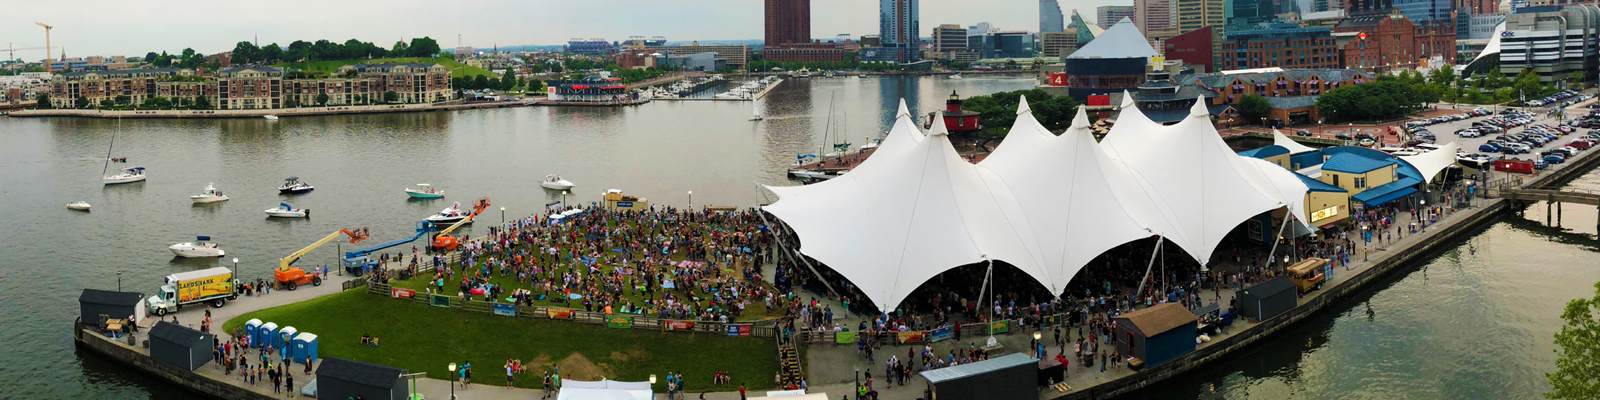 Songs for Summer- Waterfront Concert Venues